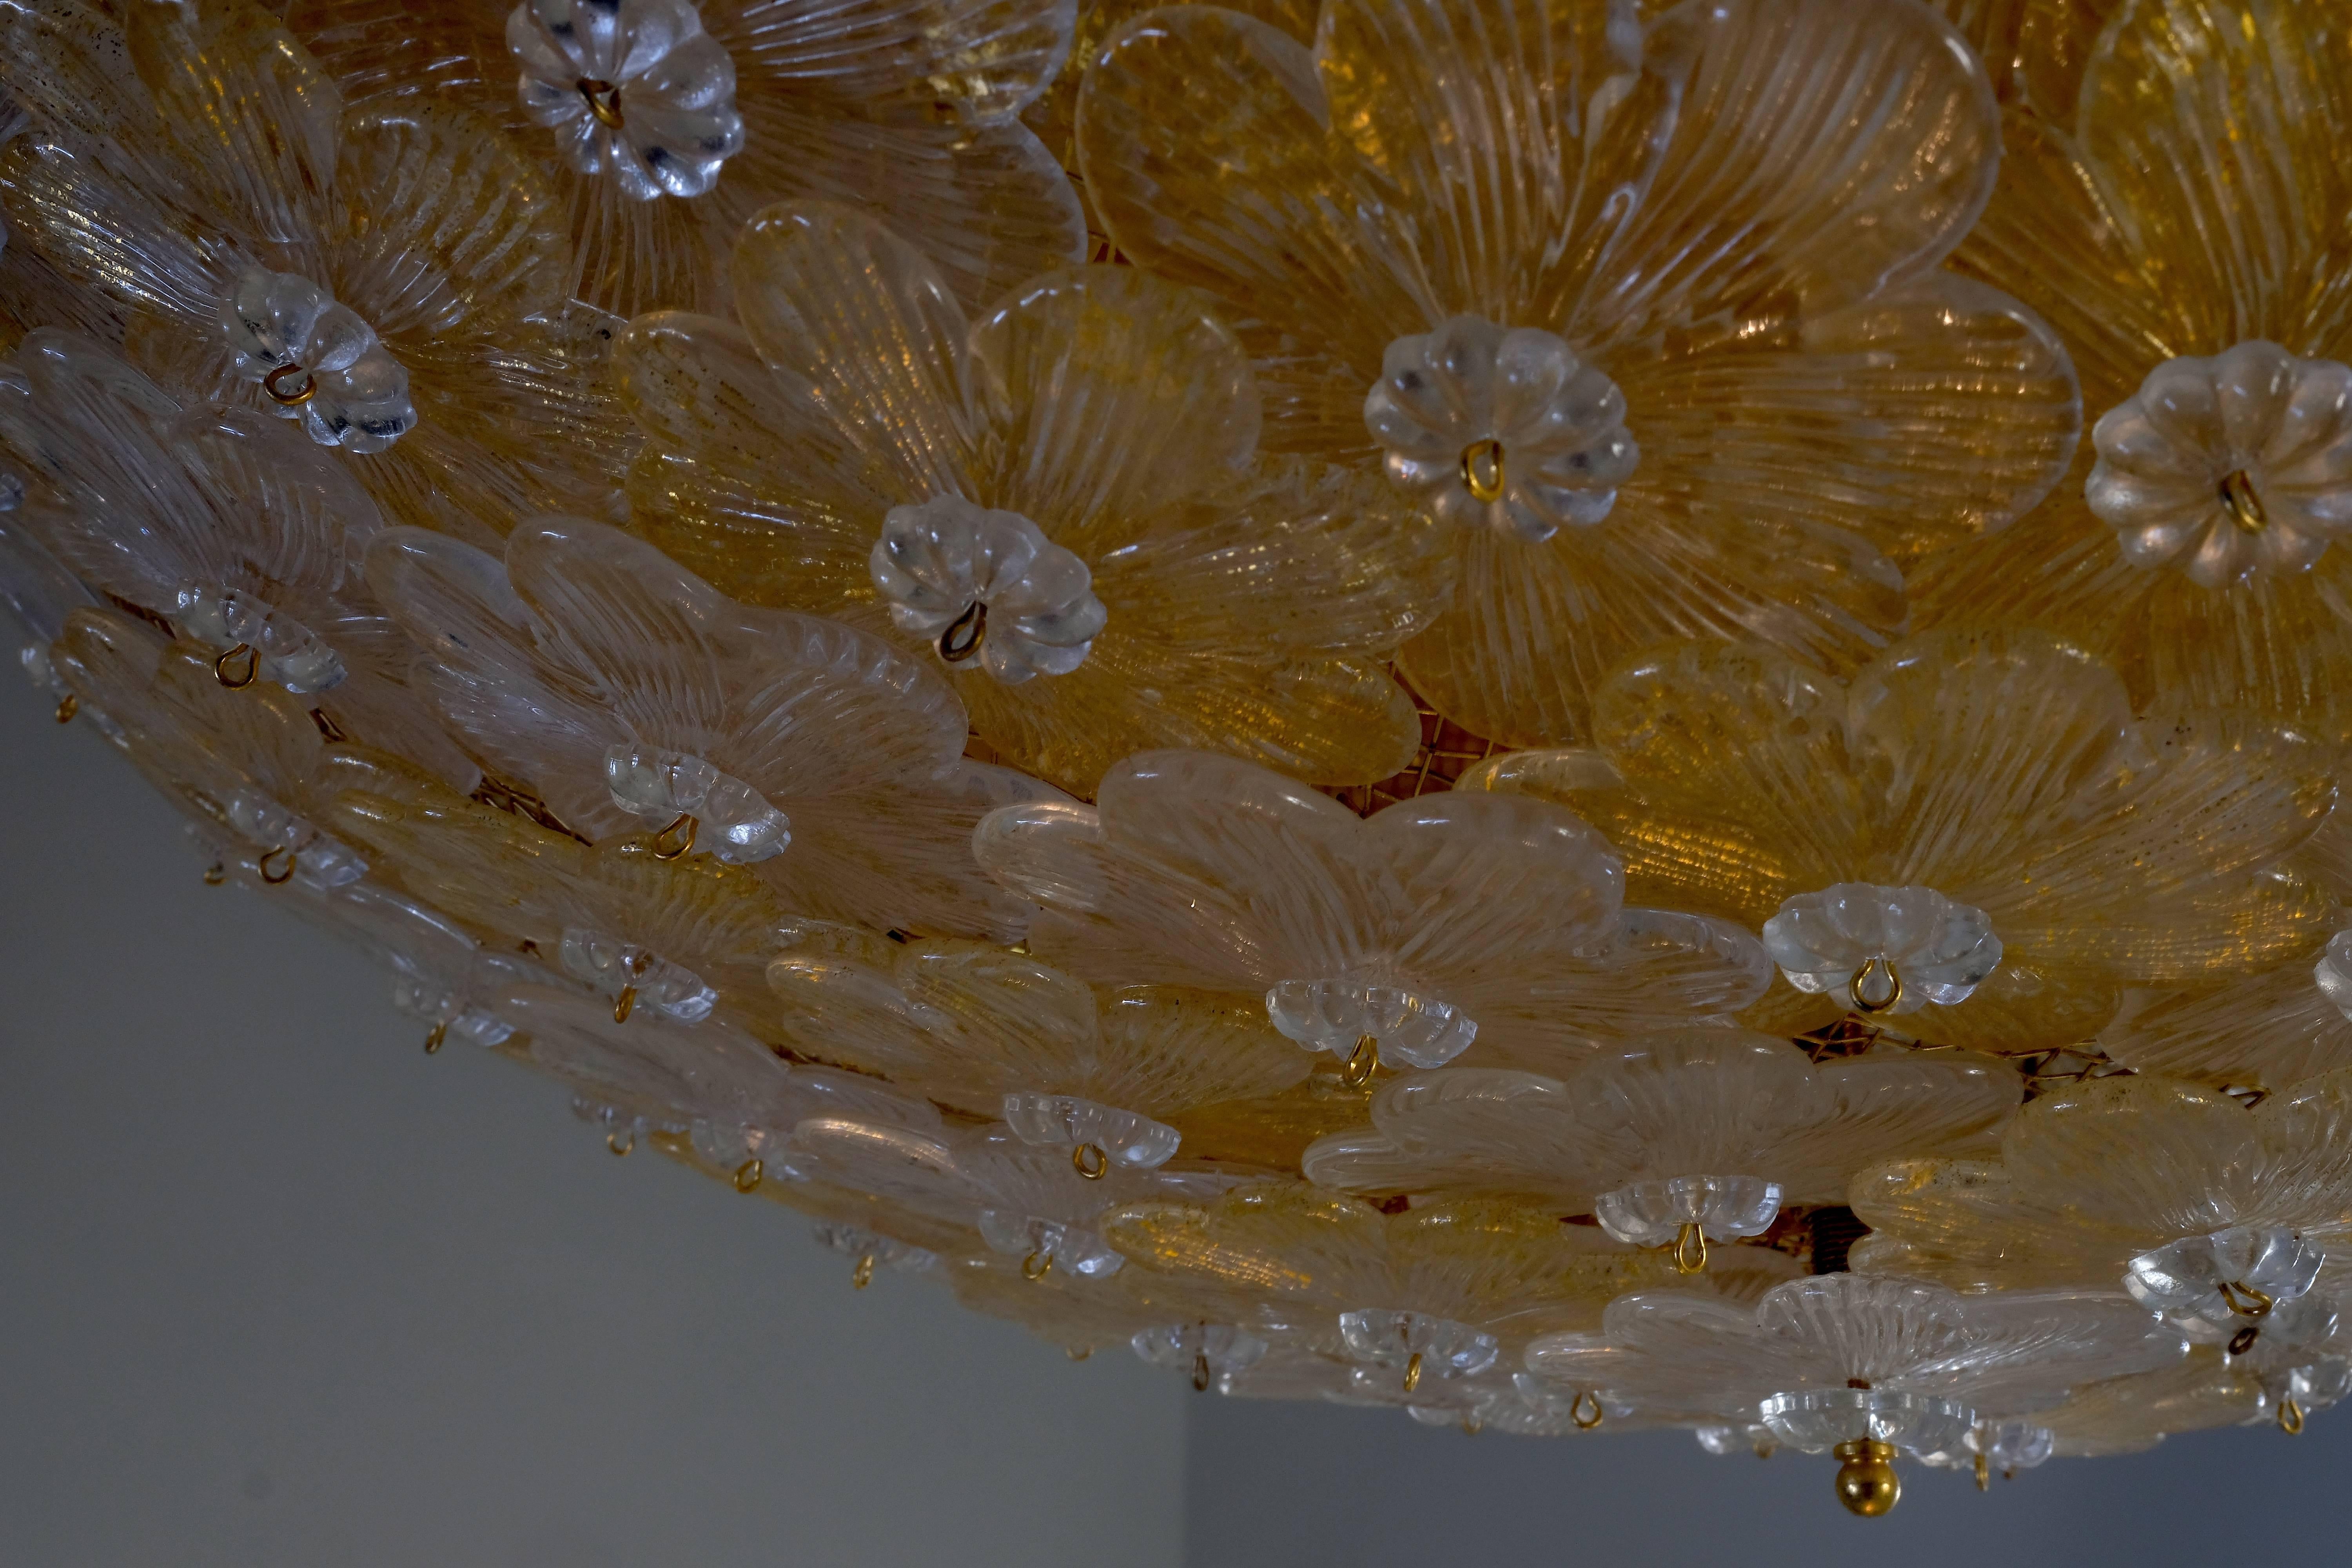 The ceiling lamp is made of dozens of small roses in precious Murano glass with gold inclusions. Measures:
Diameter 65 cm
Height 25 cm.